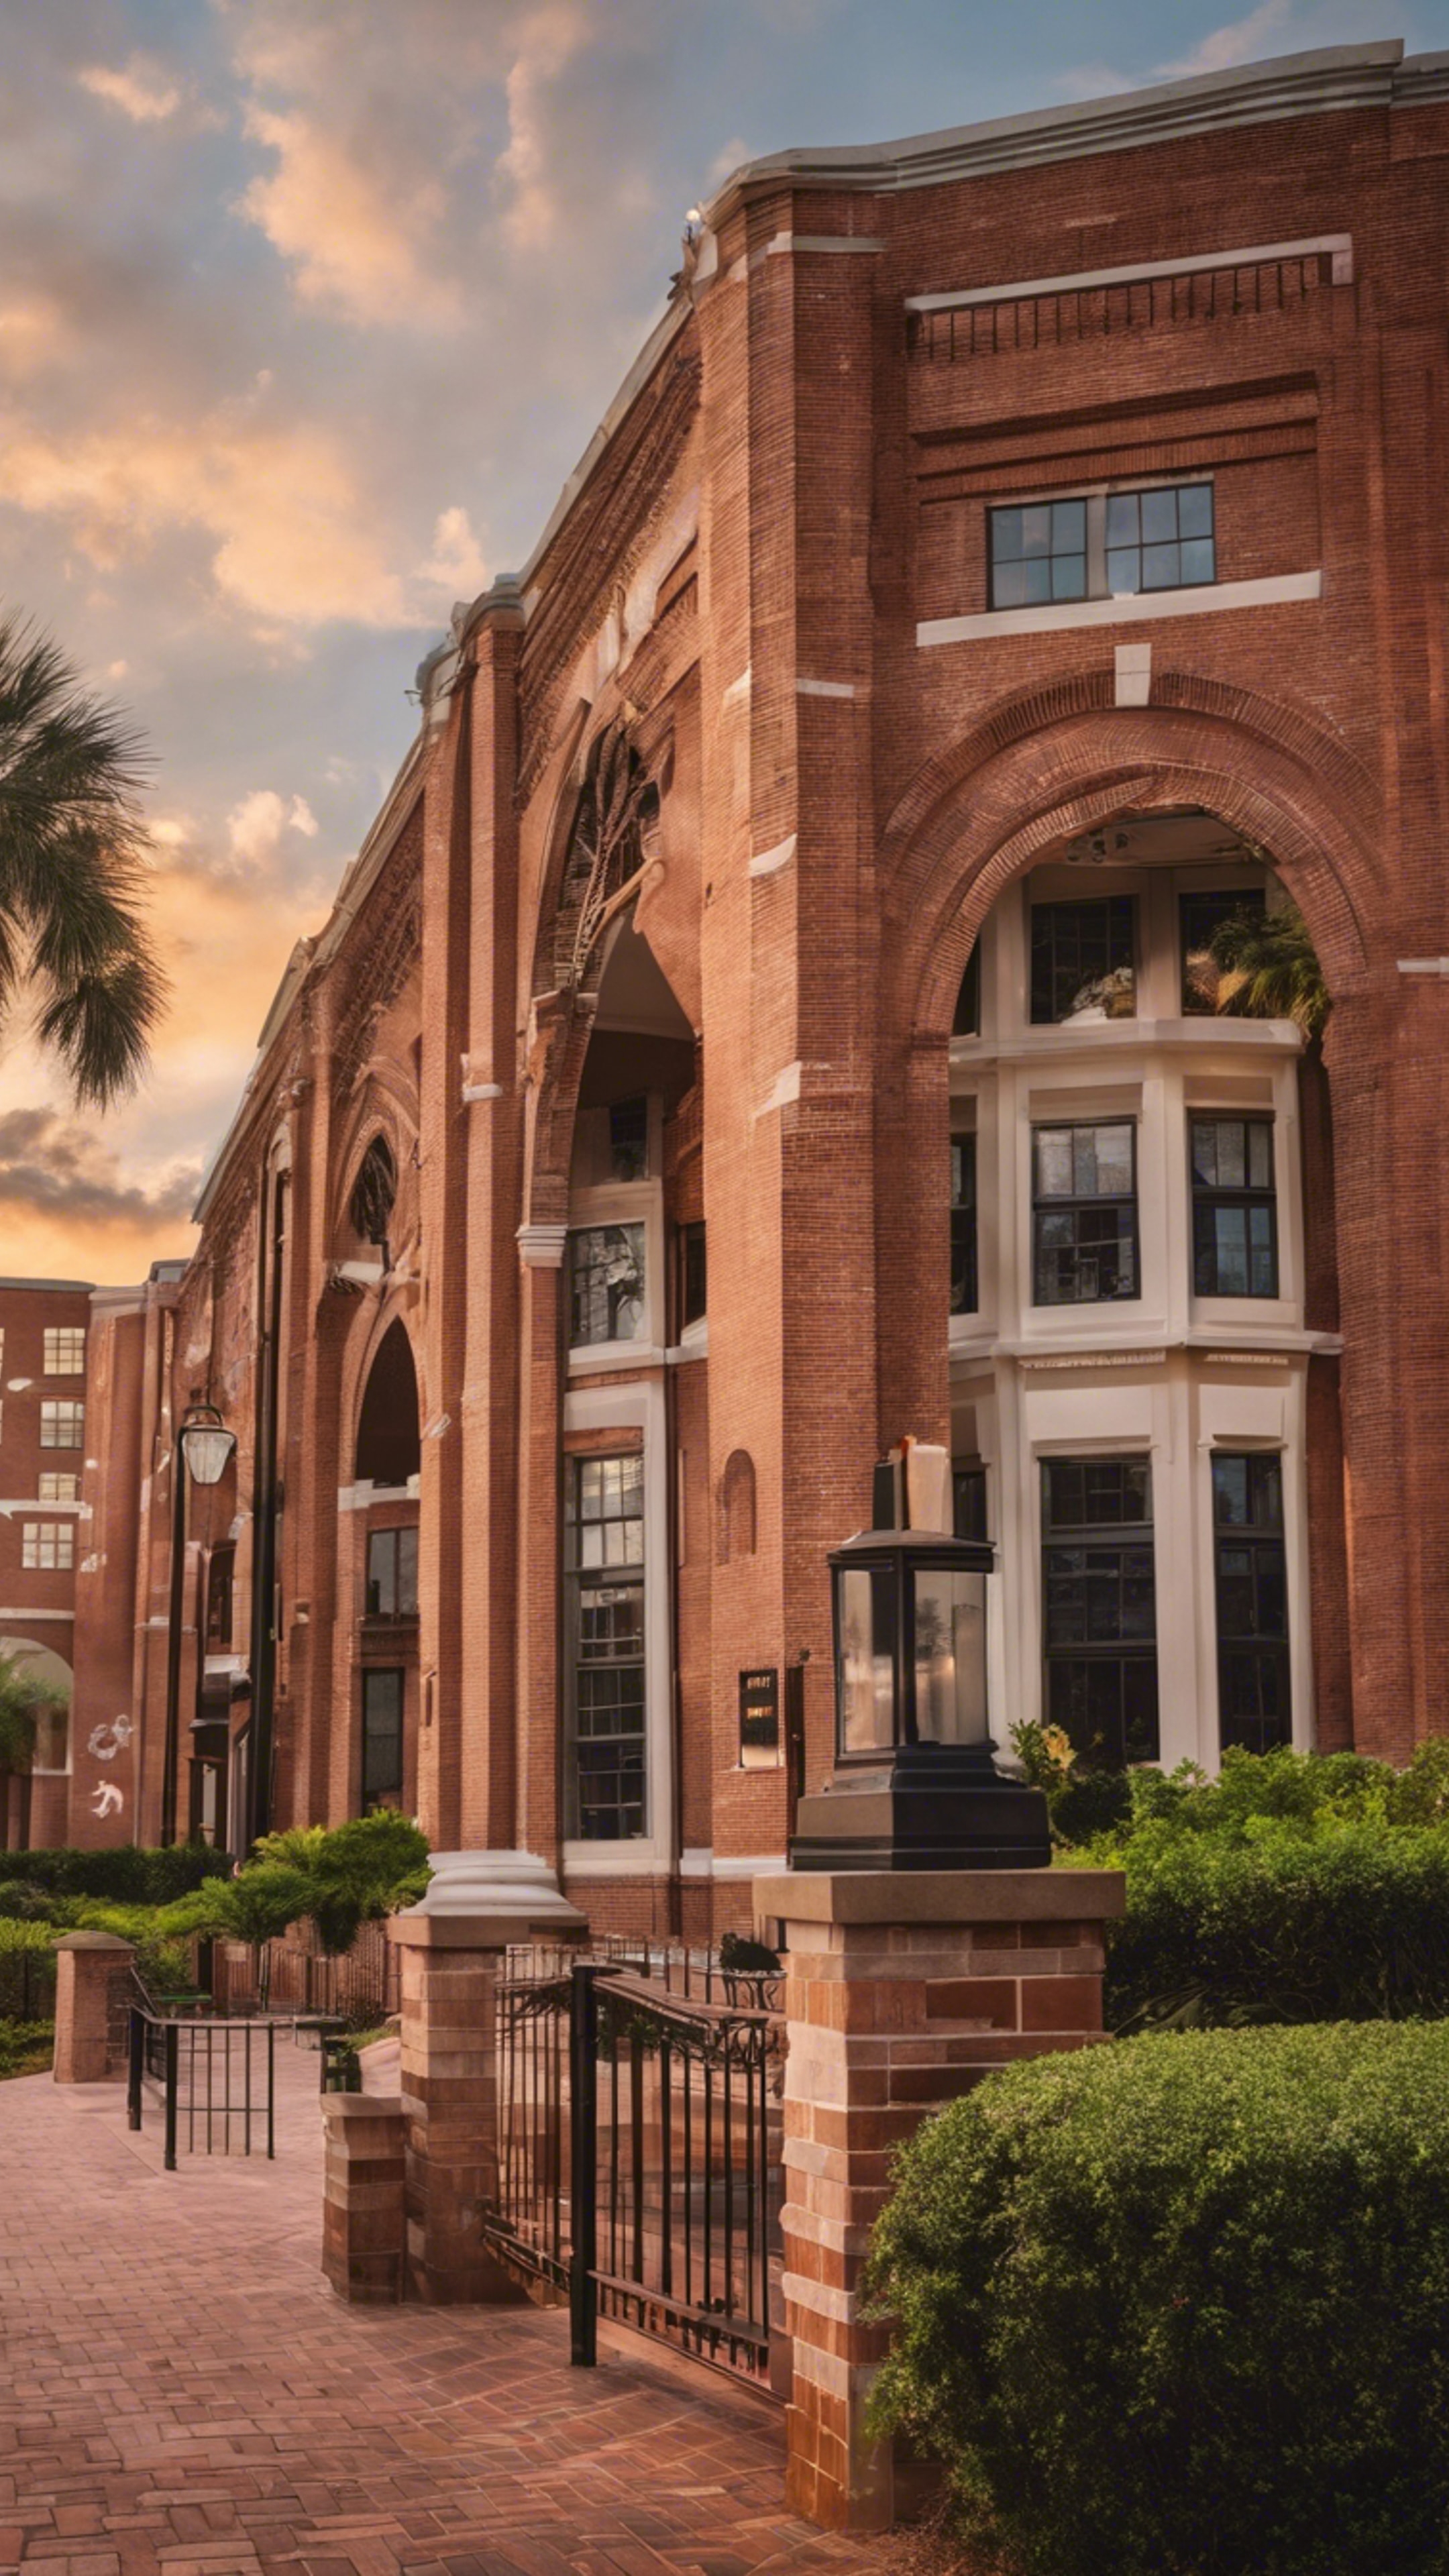 The Florida State University campus, its grand, brick academic buildings glowing under the sunset. Wallpaper[2f1797a15cd44adf931f]